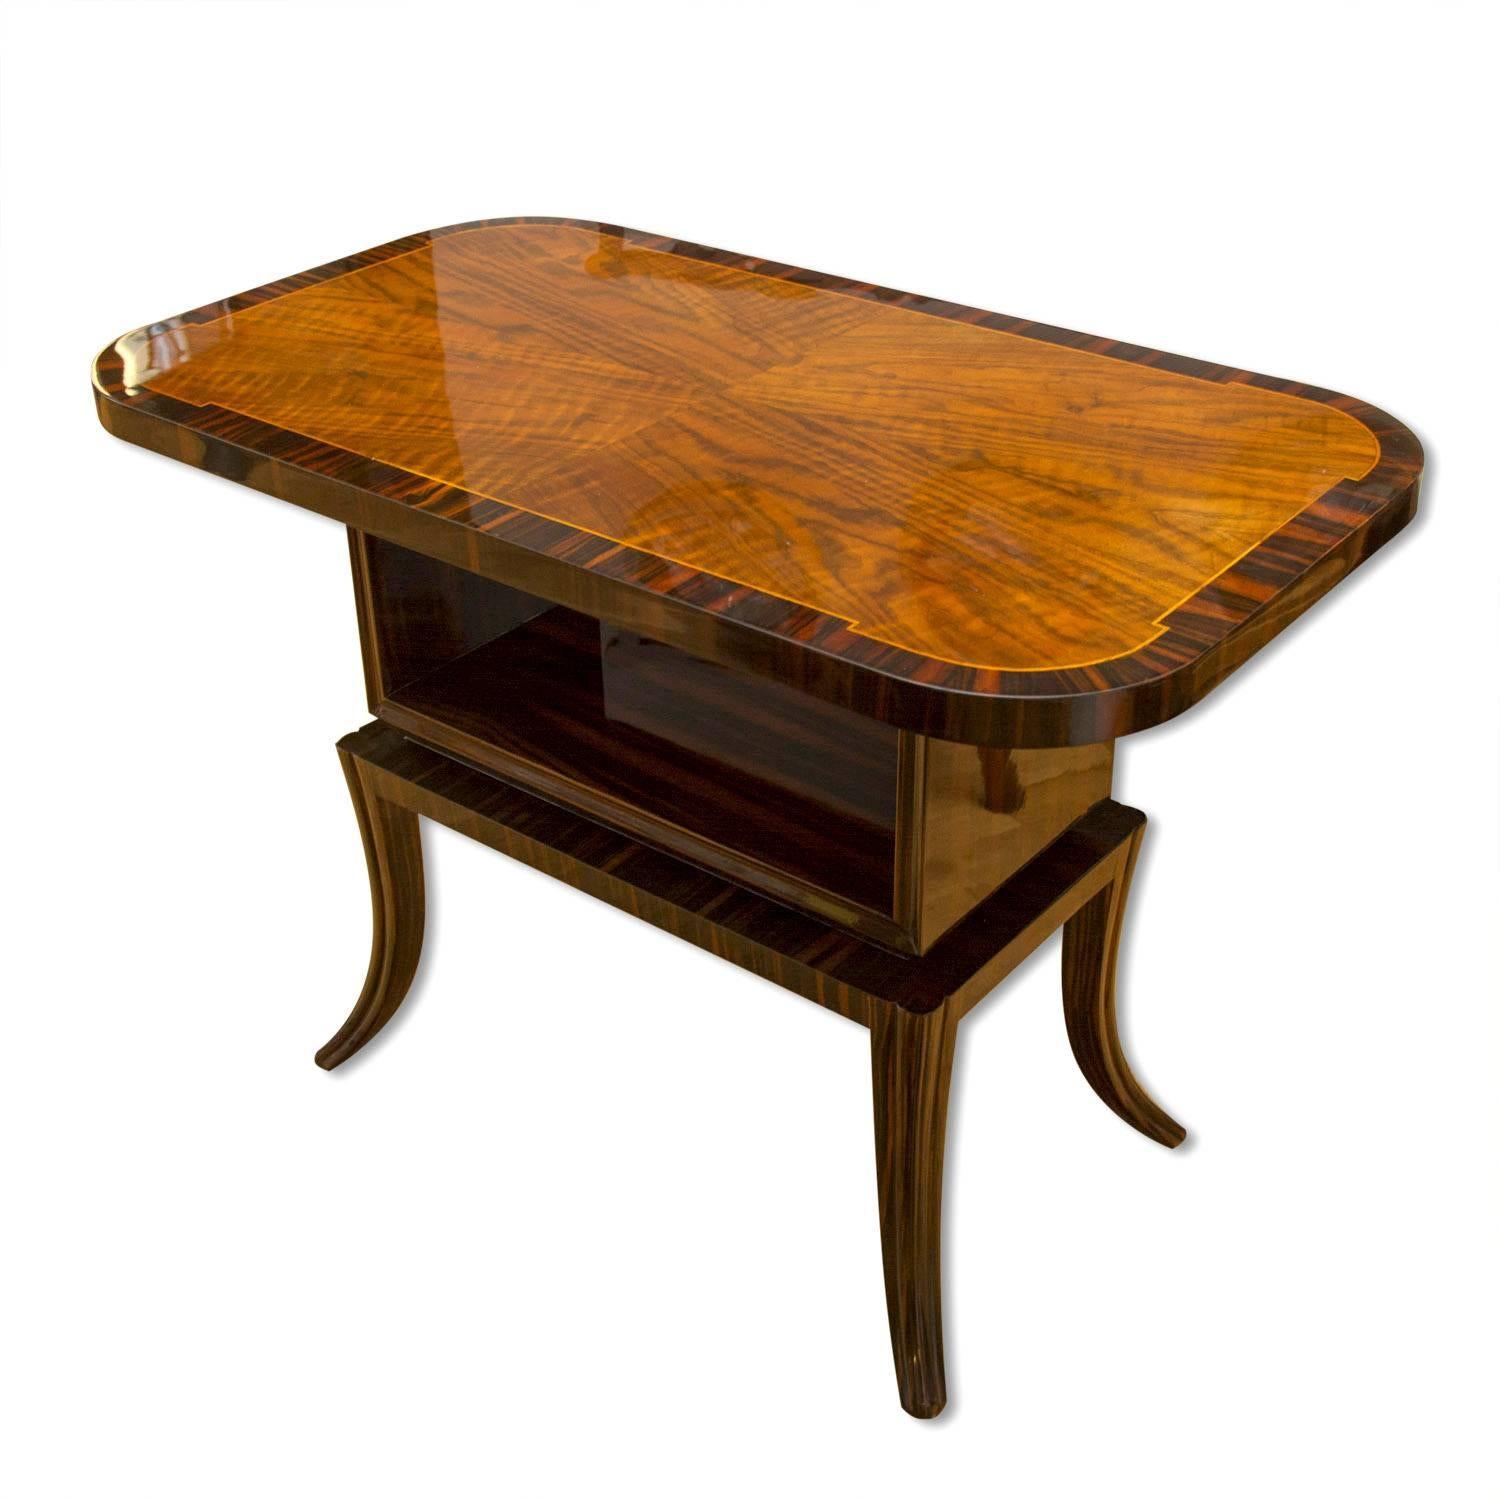 Mid-20th Century Macassar Ebony and Walnut Coffee Table, 1930s, Central Europe For Sale